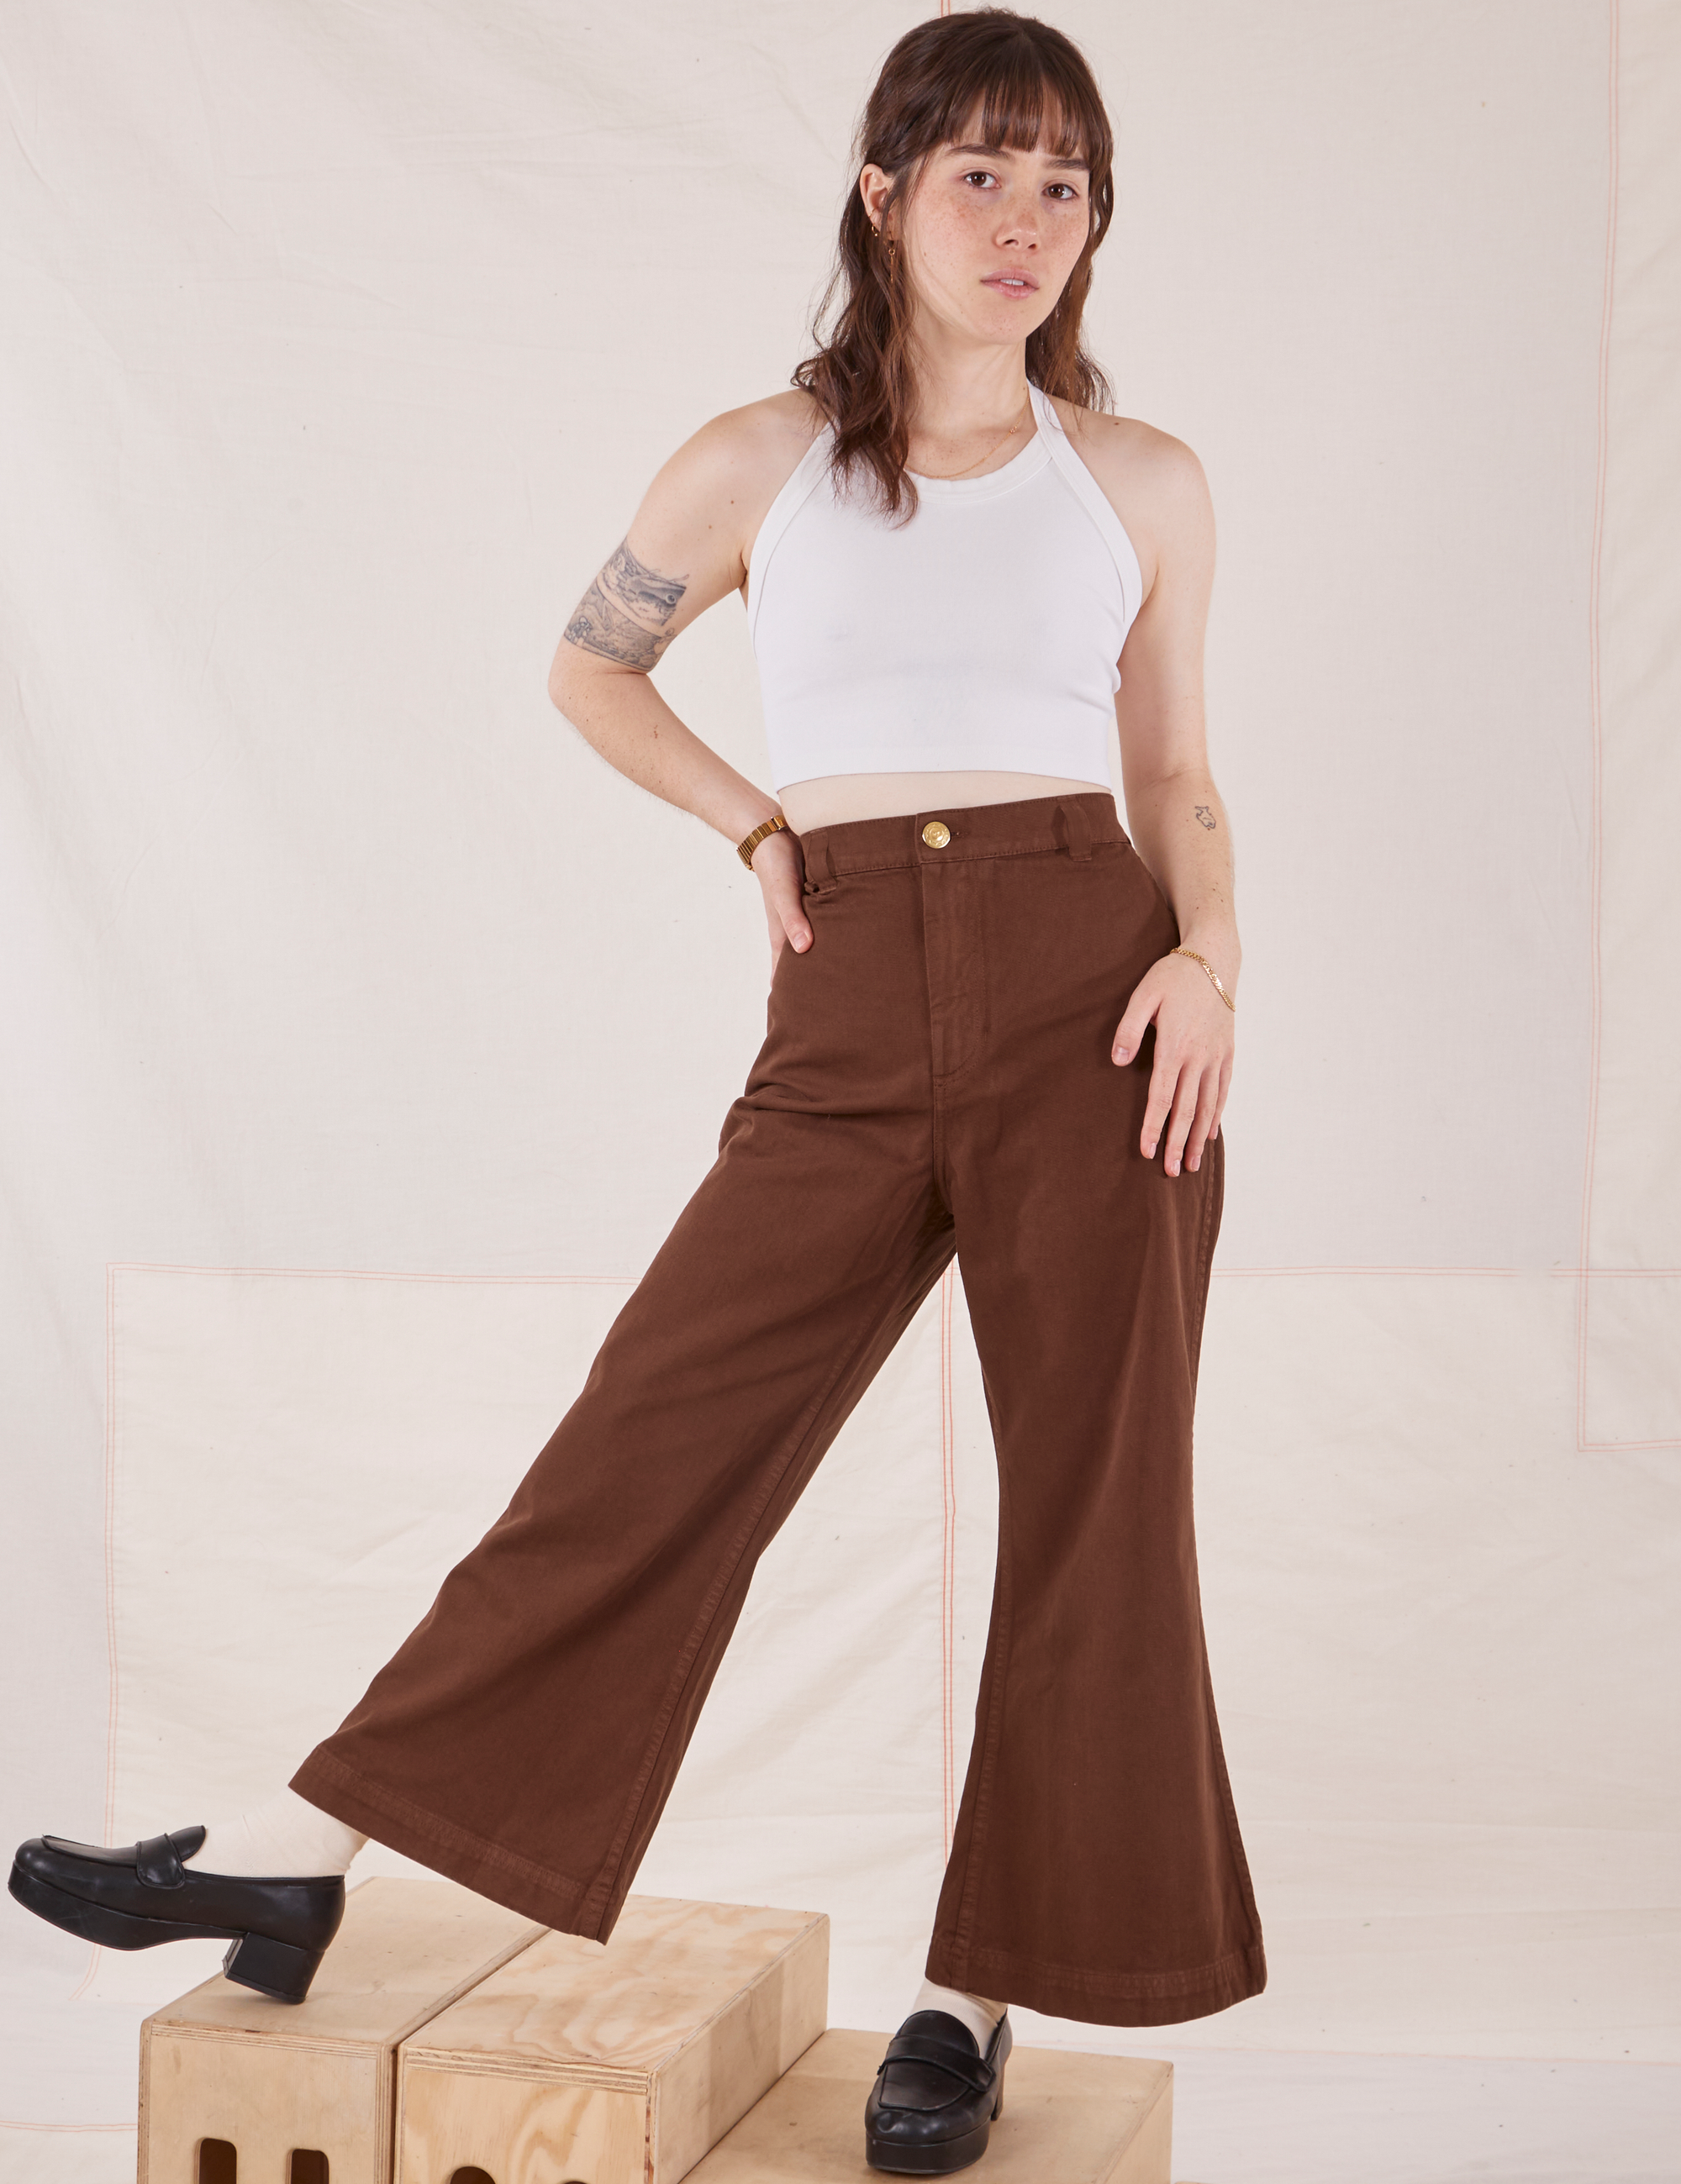 Hana is 5&#39;3&quot; and wearing P Petite Bell Bottoms in Fudgesicle Brown paired with a Halter Top in vintage tee off-white